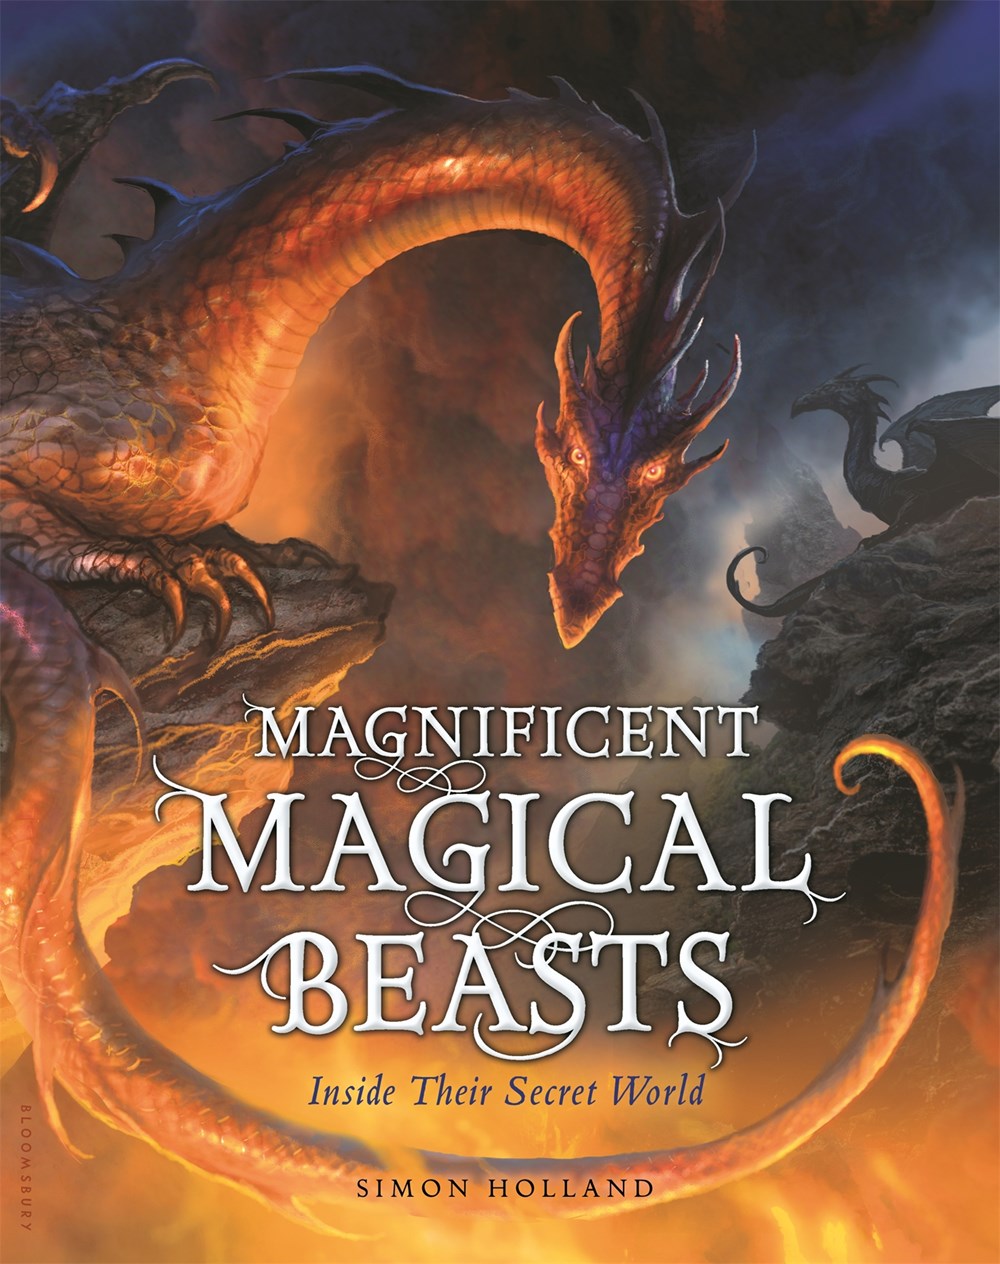 Magnificent Magical Beasts